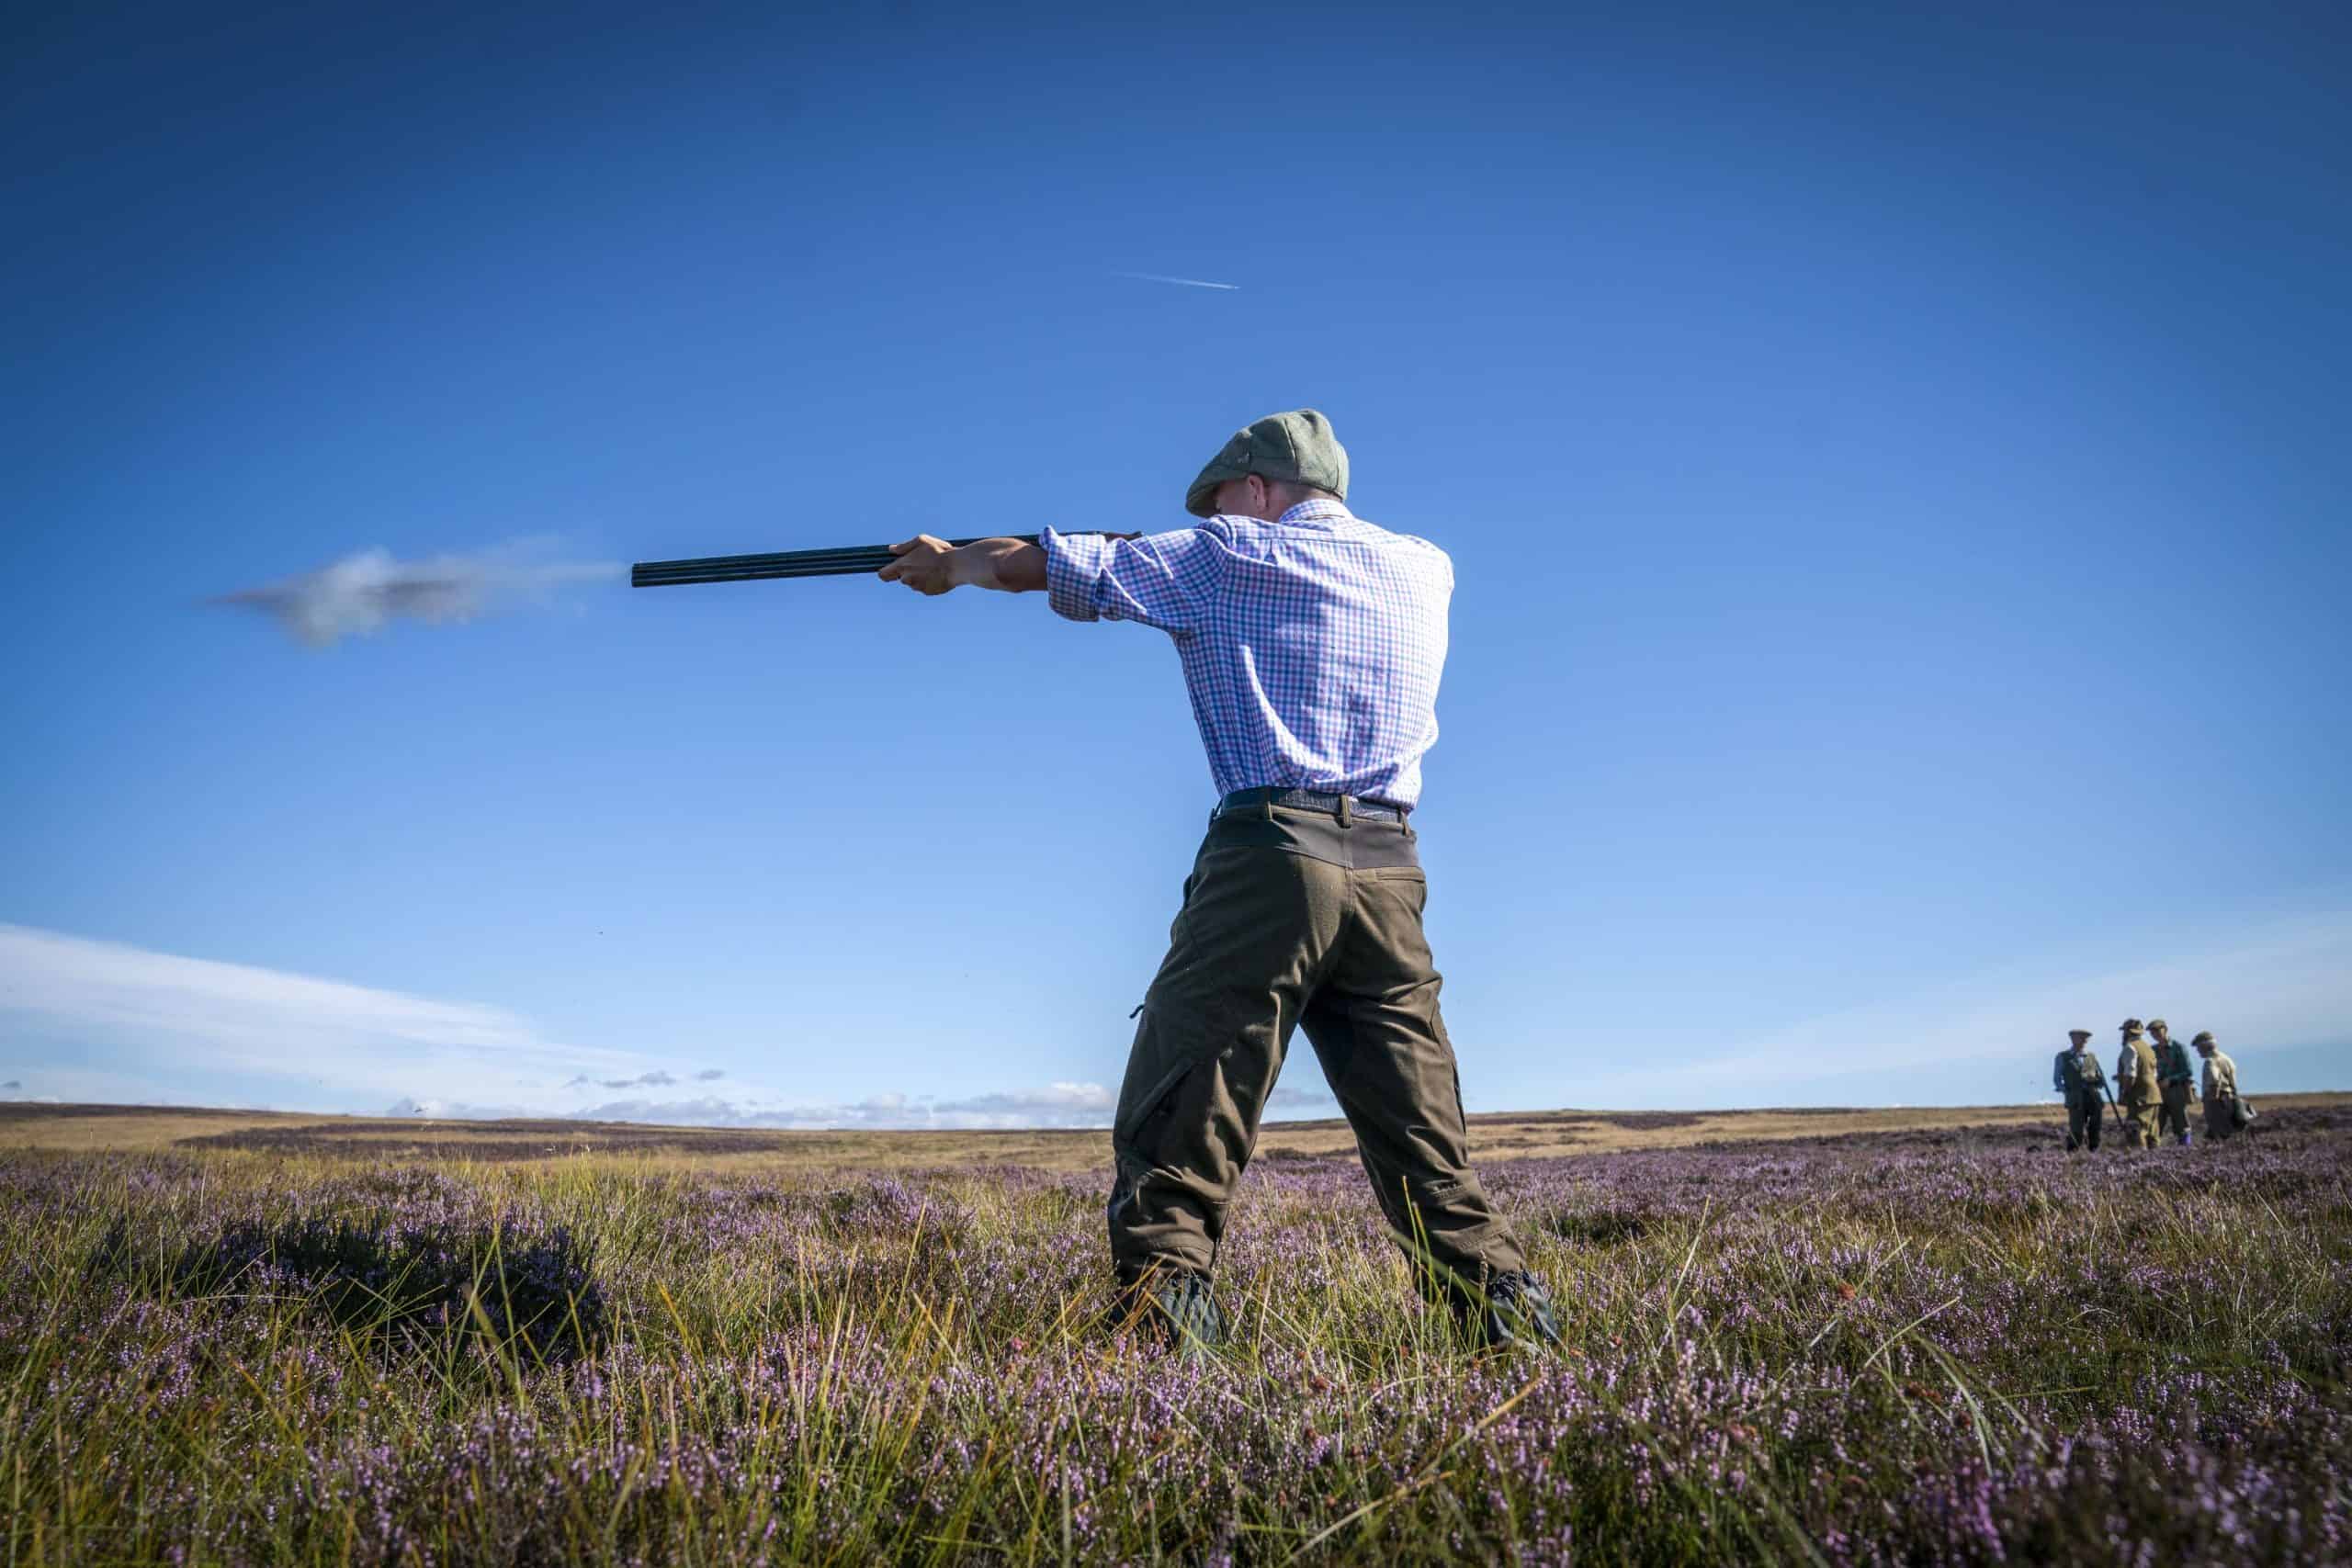 Good news for bloodthirsty toffs bad news for birds: Grouse shooting season begins